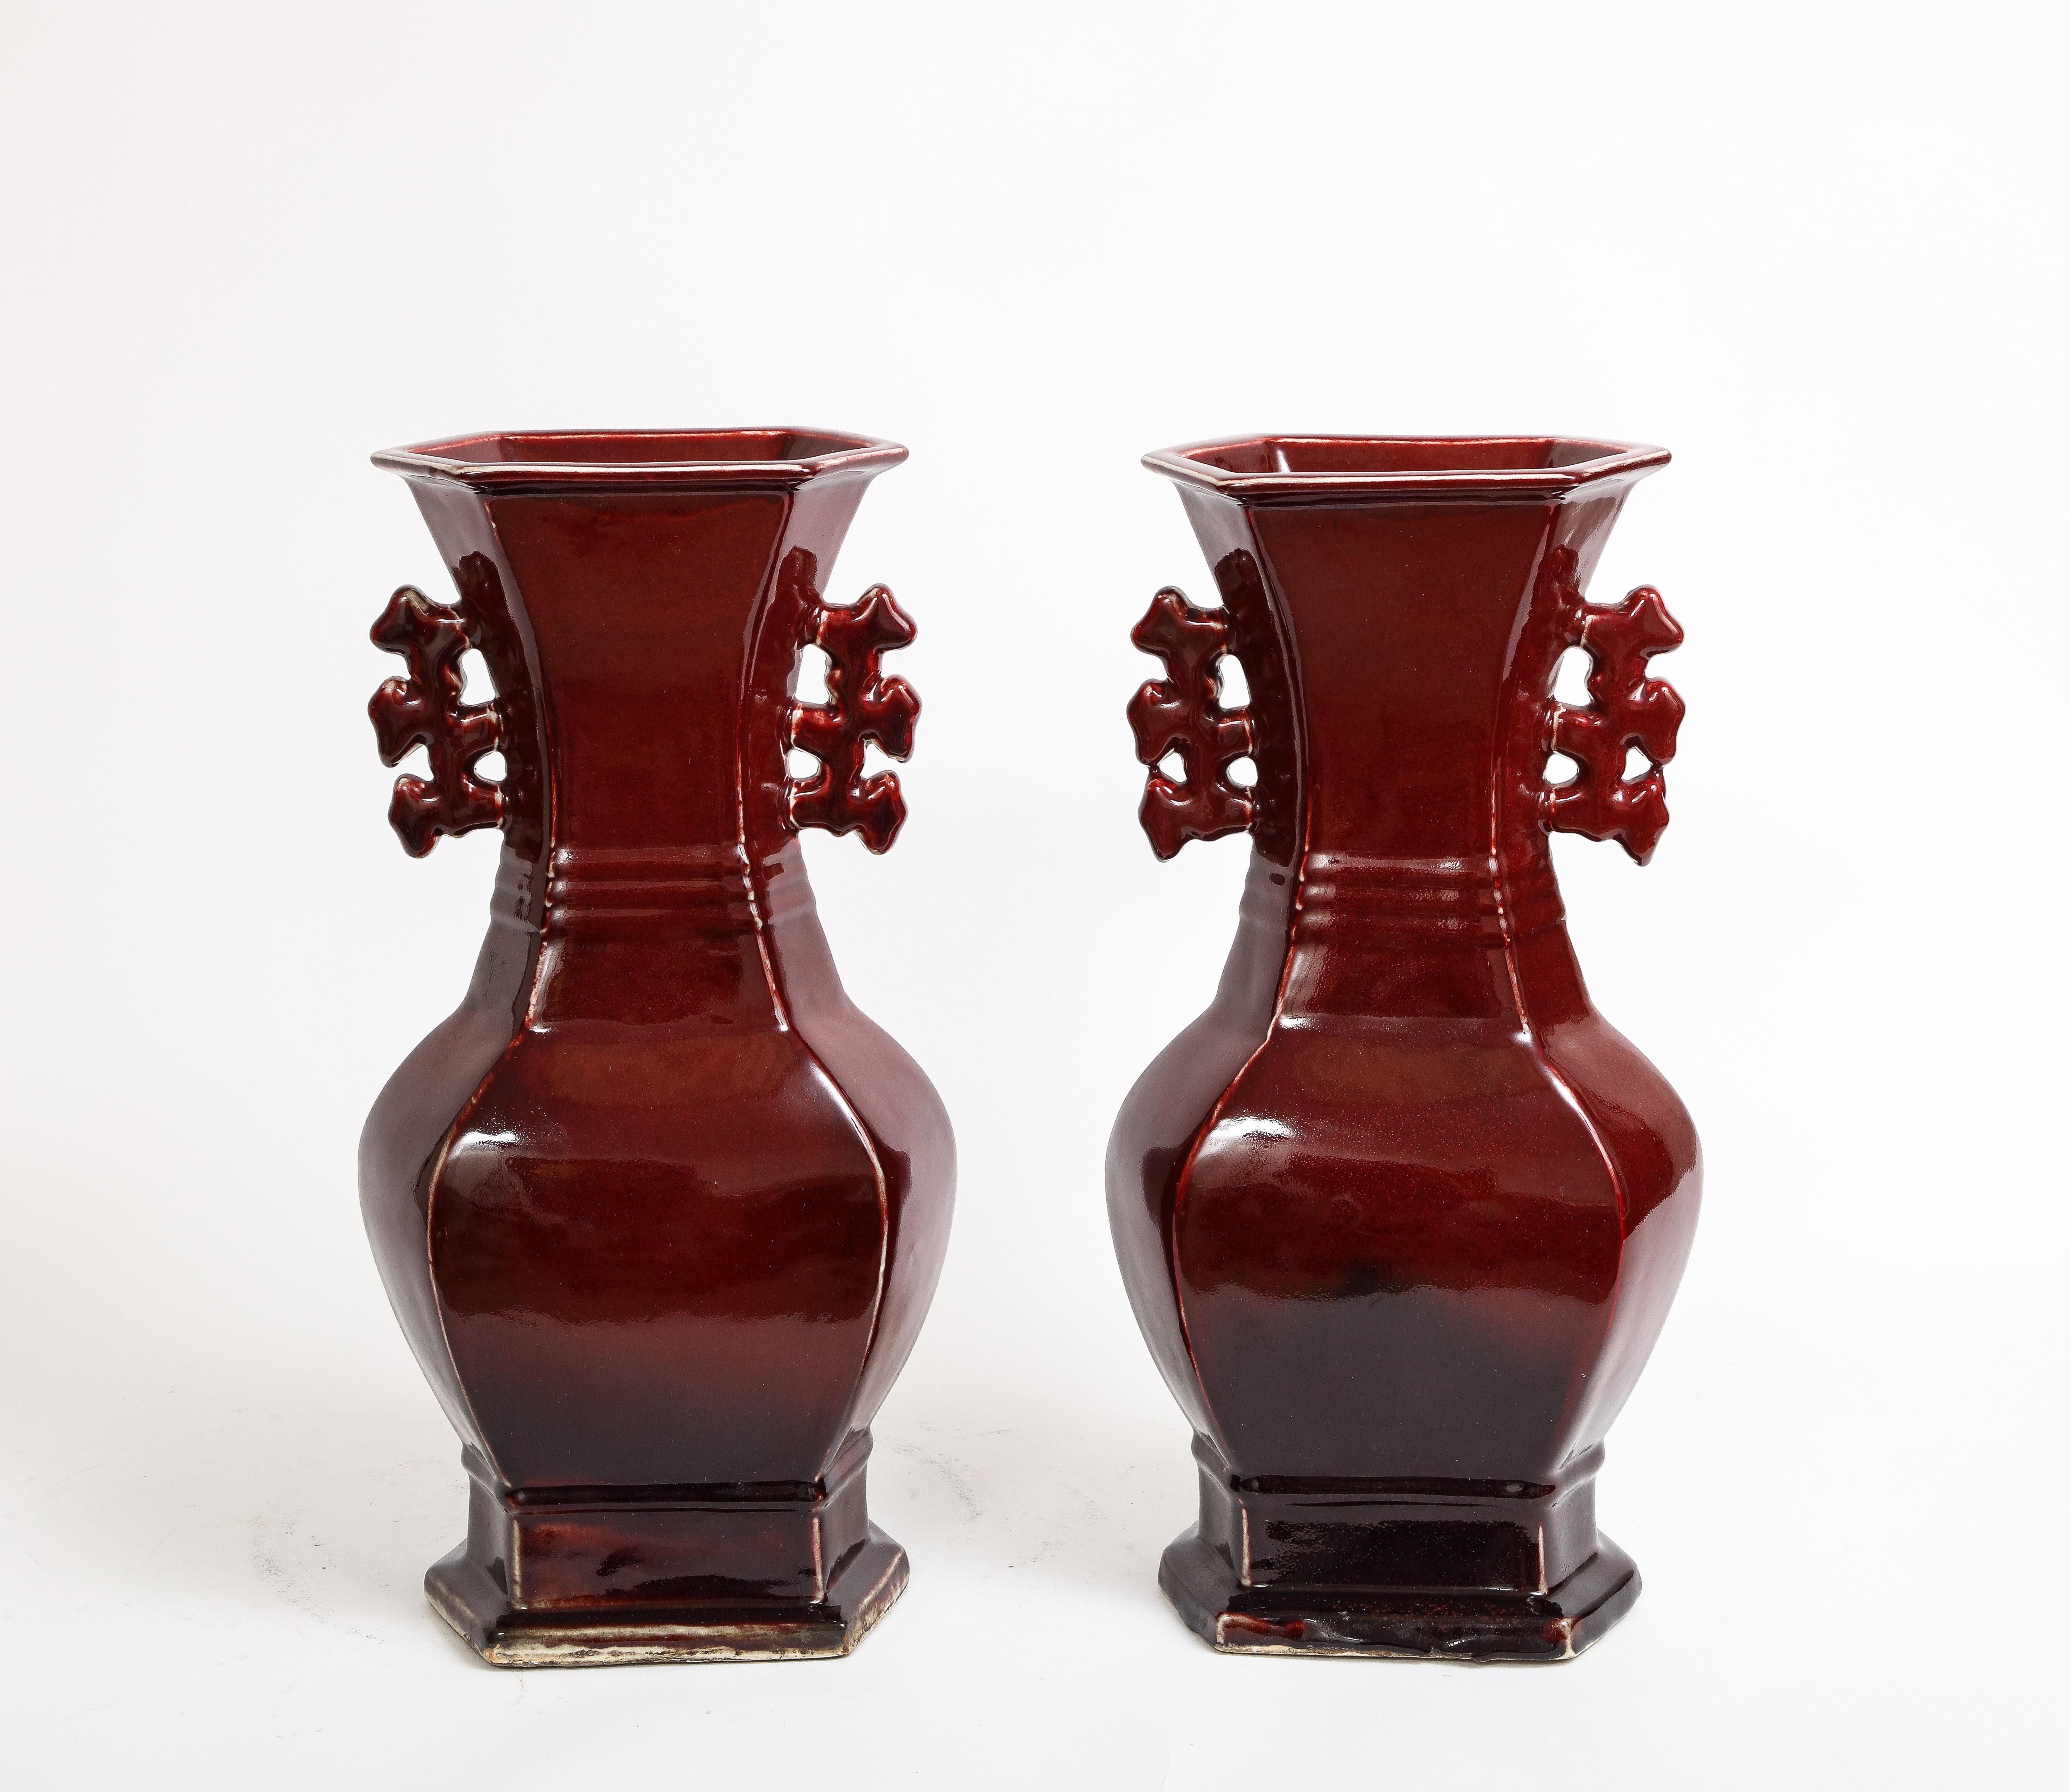 An Exquisite Pair of Chinese Monochrome Ox Blood Porcelain Double Handled Vases. The deep, rich hue of ox blood gradually transitions to a more translucent tone towards the upper portion, creating an alluring visual effect. These vases boast an